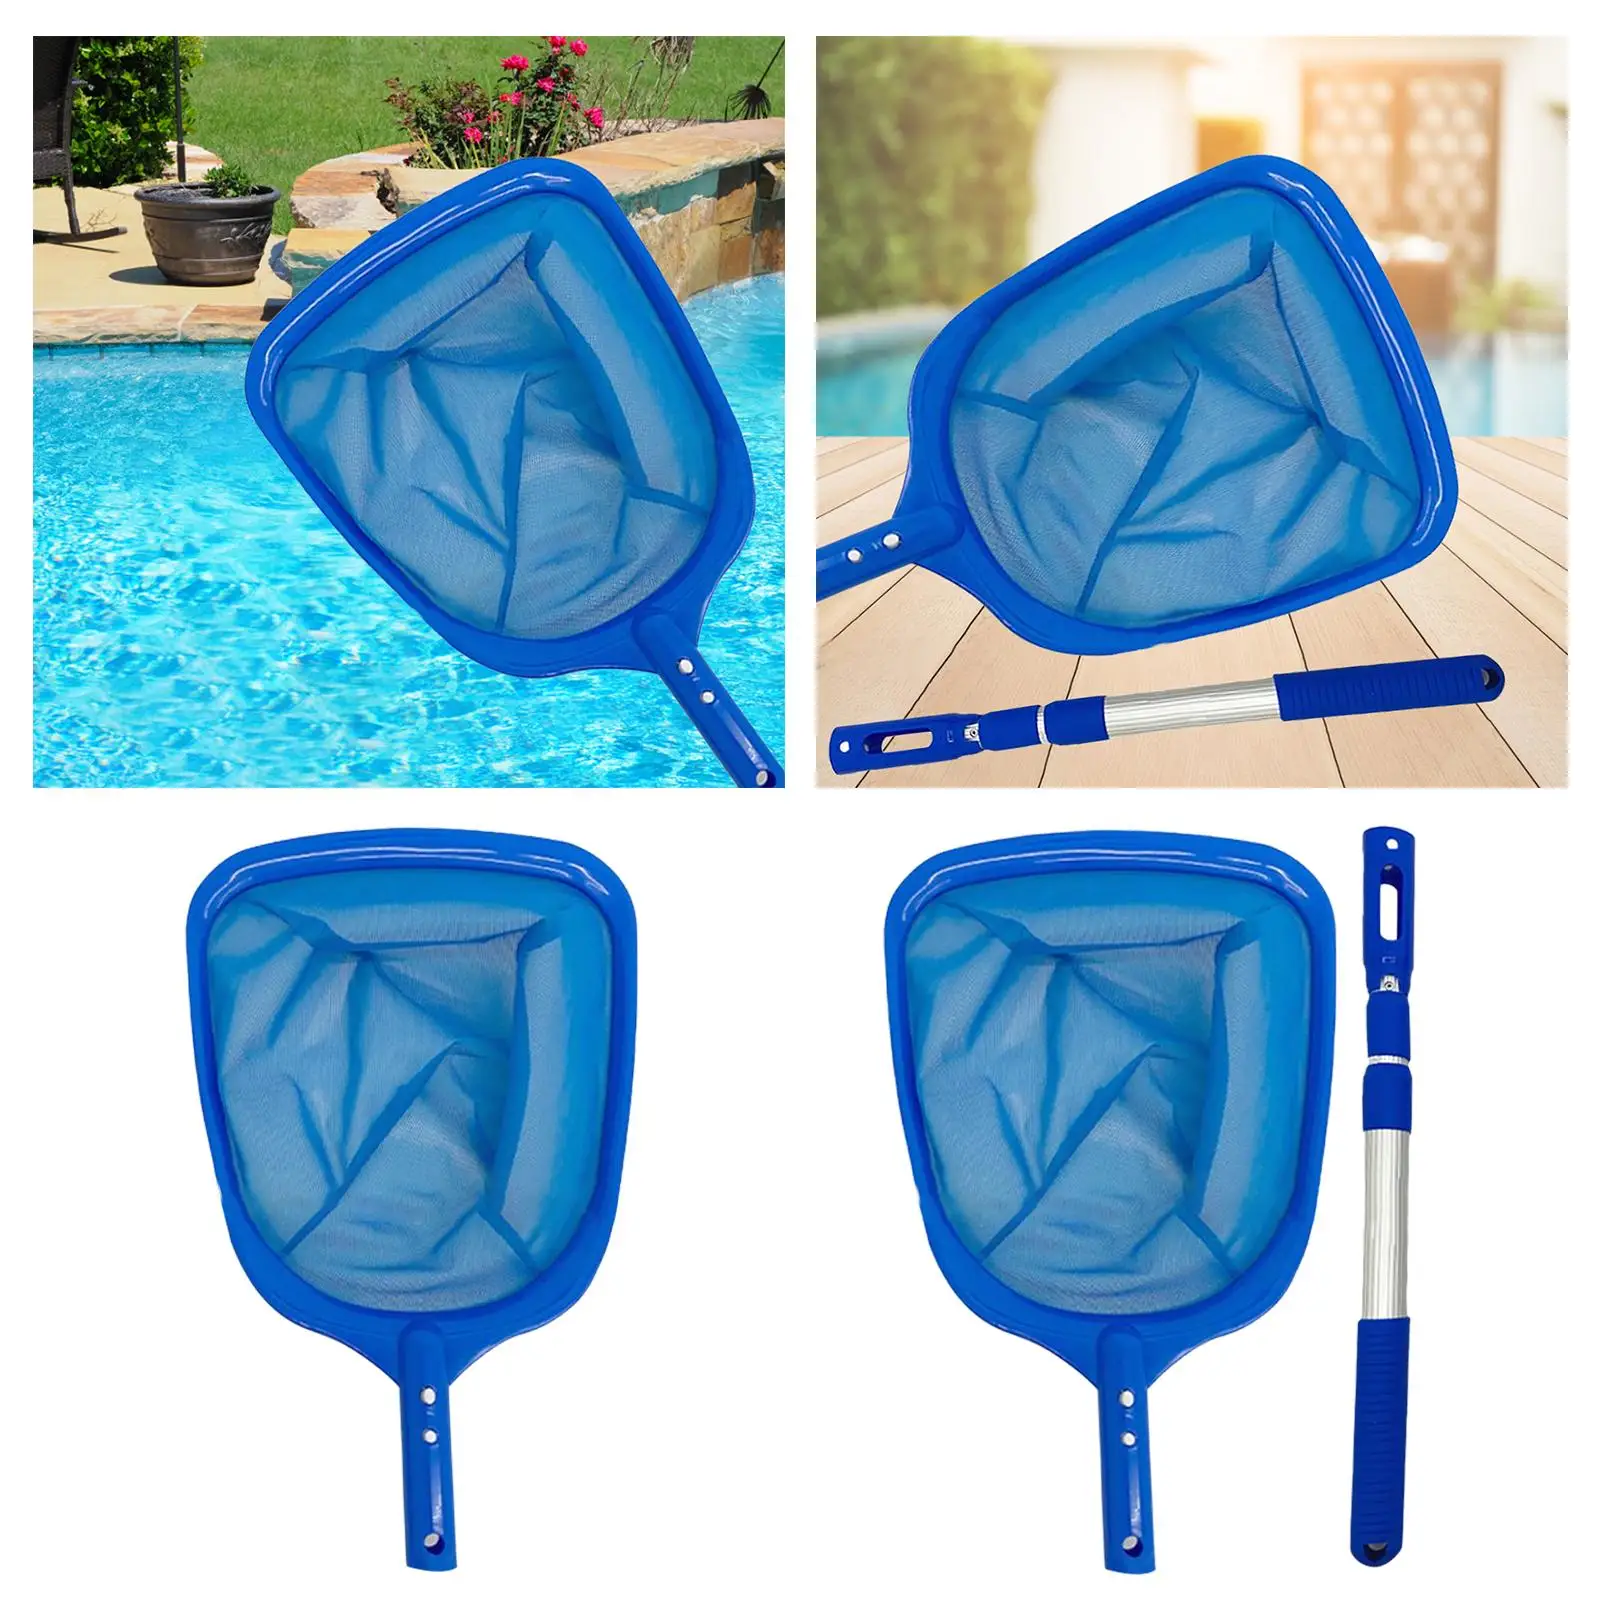 Swimming Pool Cleaner Accessories Telescoping Pole Heavy Duty for Fountains Cleaning & Maintenance Tool Removing Leaves & Debris